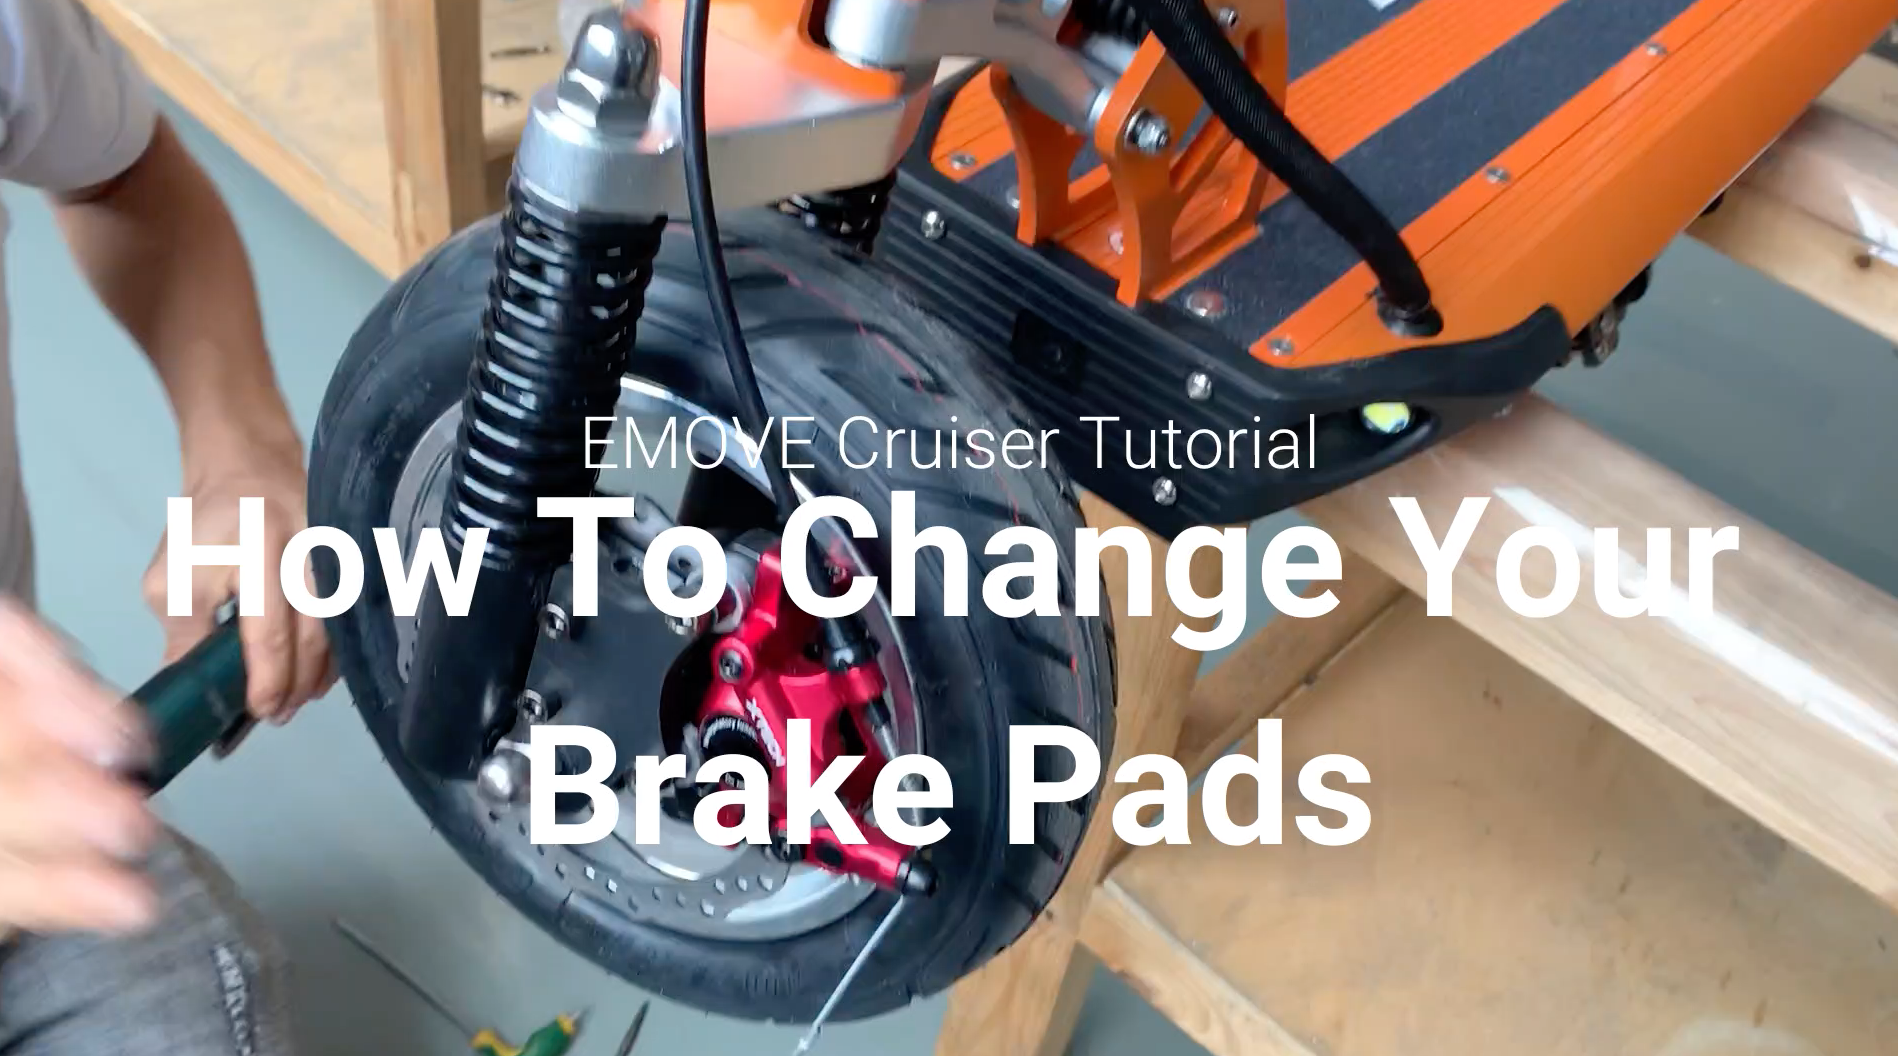 How to replace/change brake pads on your EMOVE Cruiser Electric Scooter?